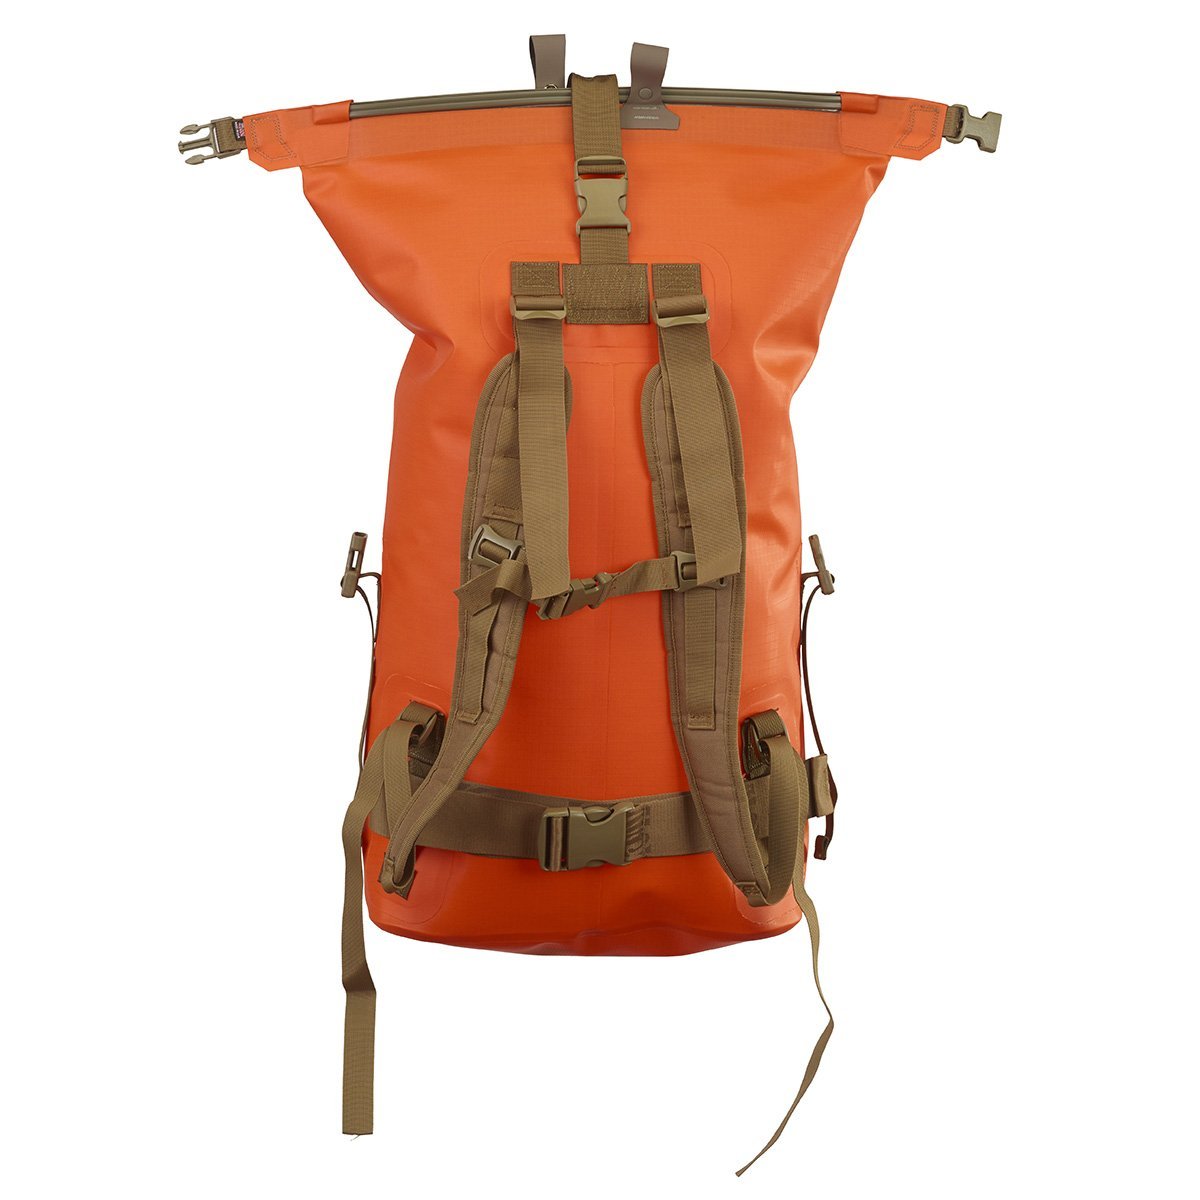 Animas Backpack - 40 Litres - Dry Bags